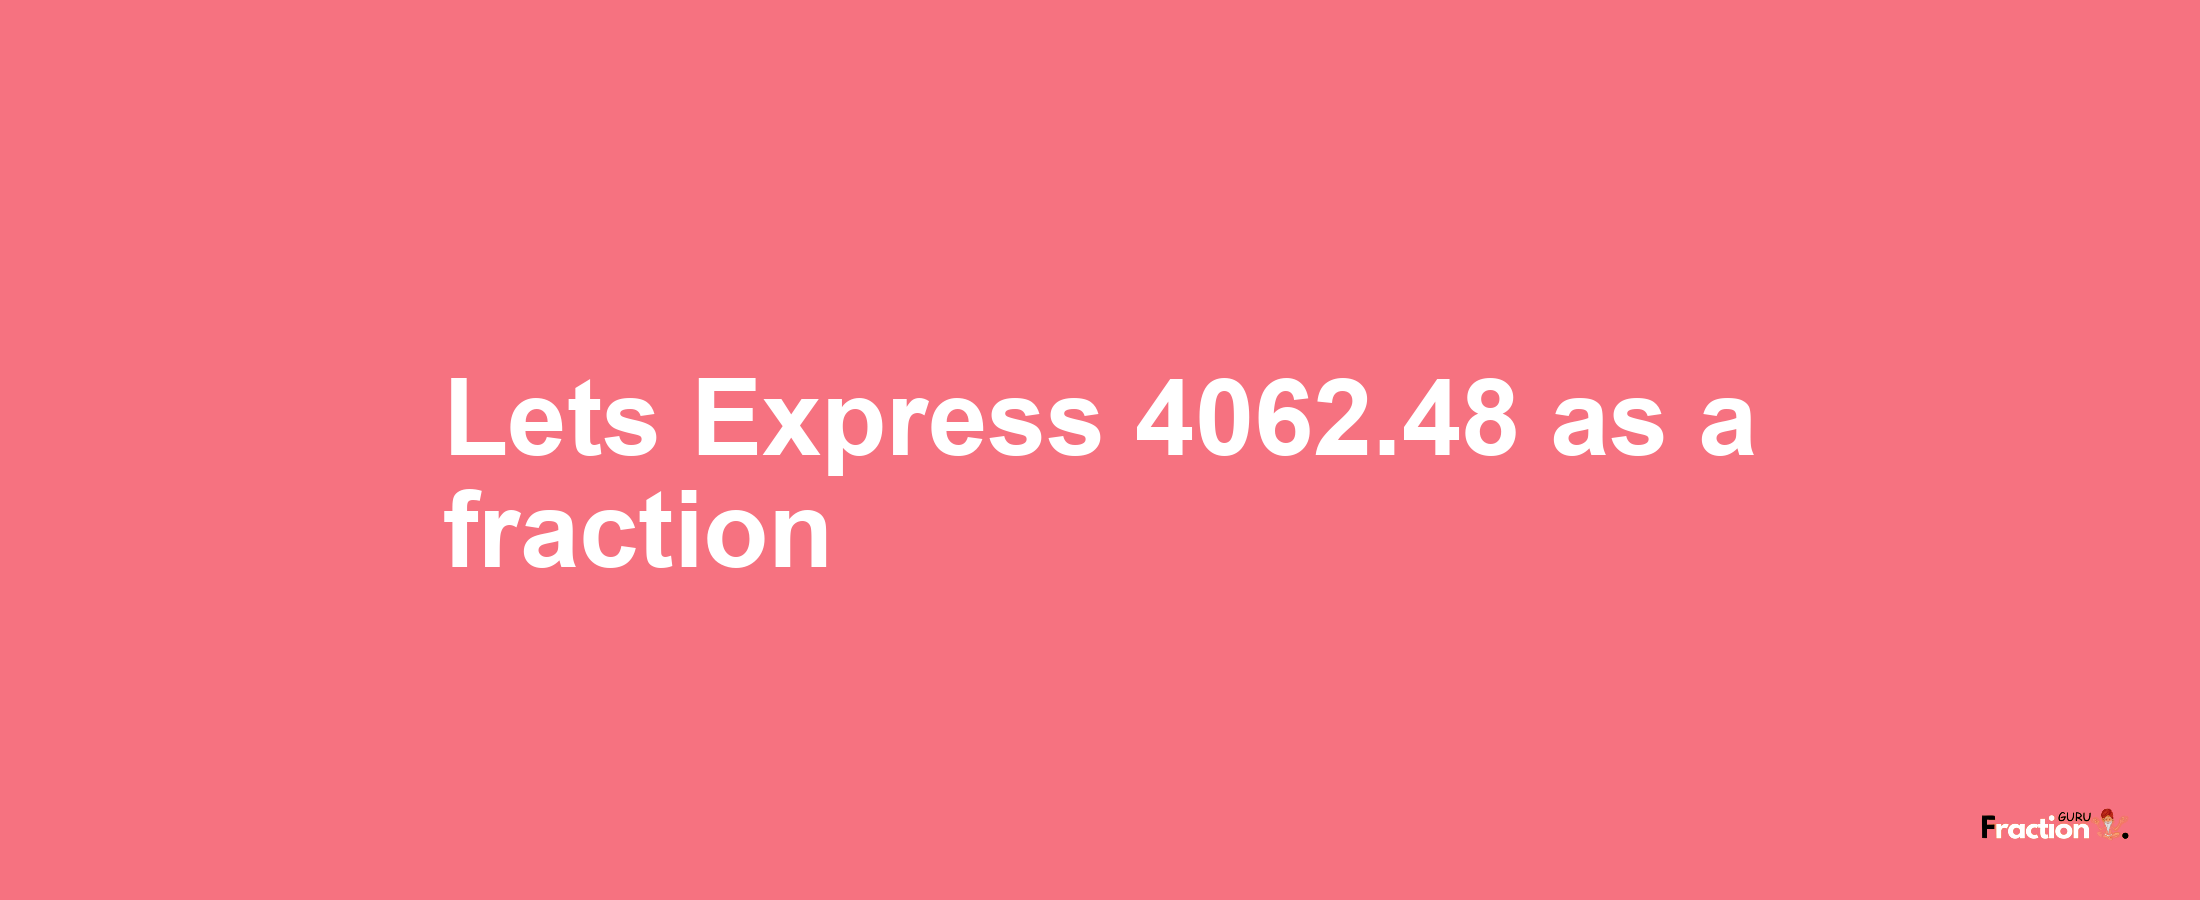 Lets Express 4062.48 as afraction